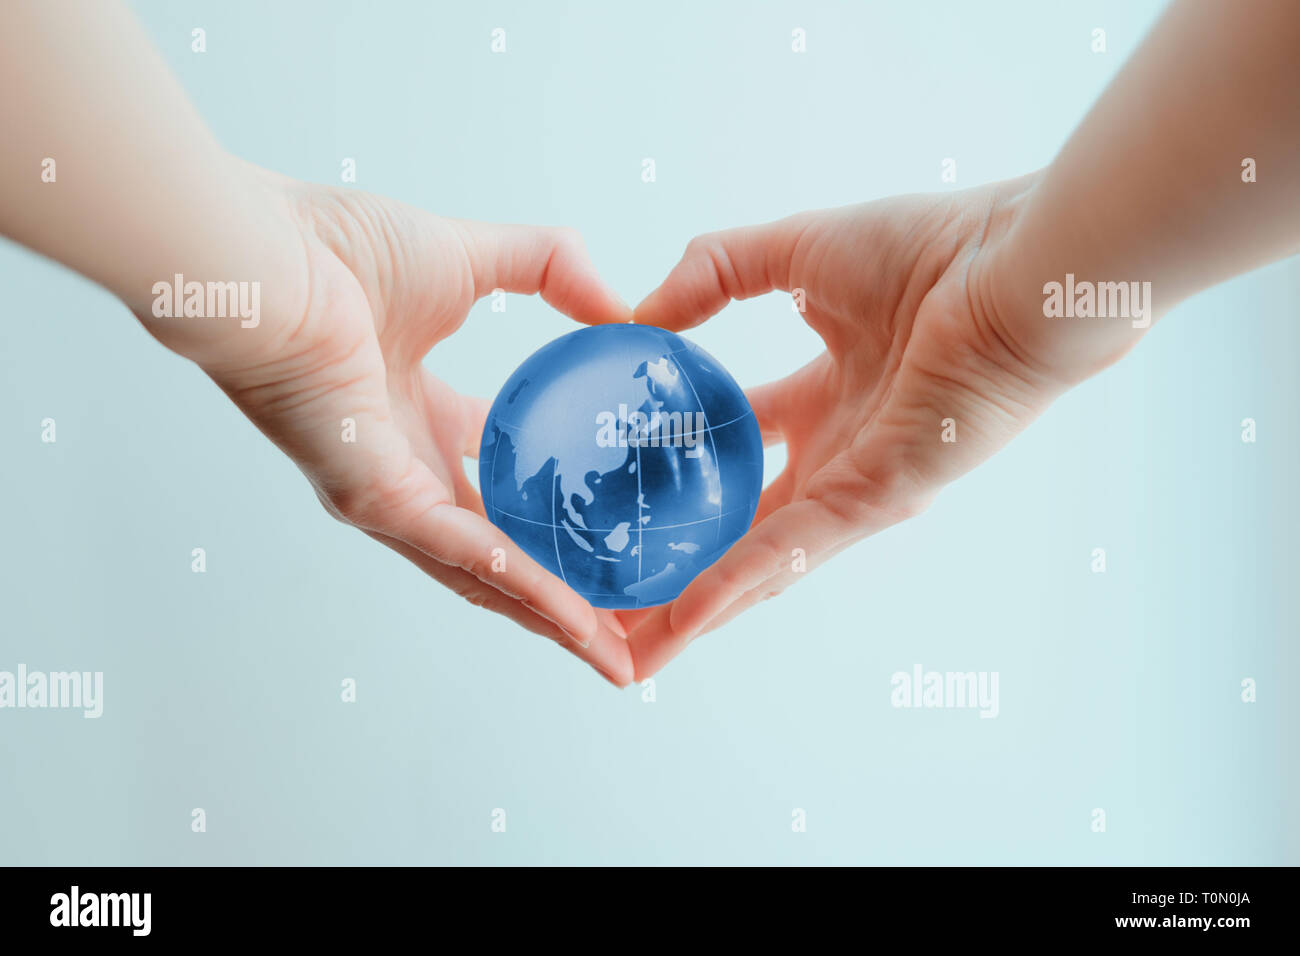 Two hands in shape of a heart holding a blue glass globe of Indoneasia and Phillipine sea Stock Photo